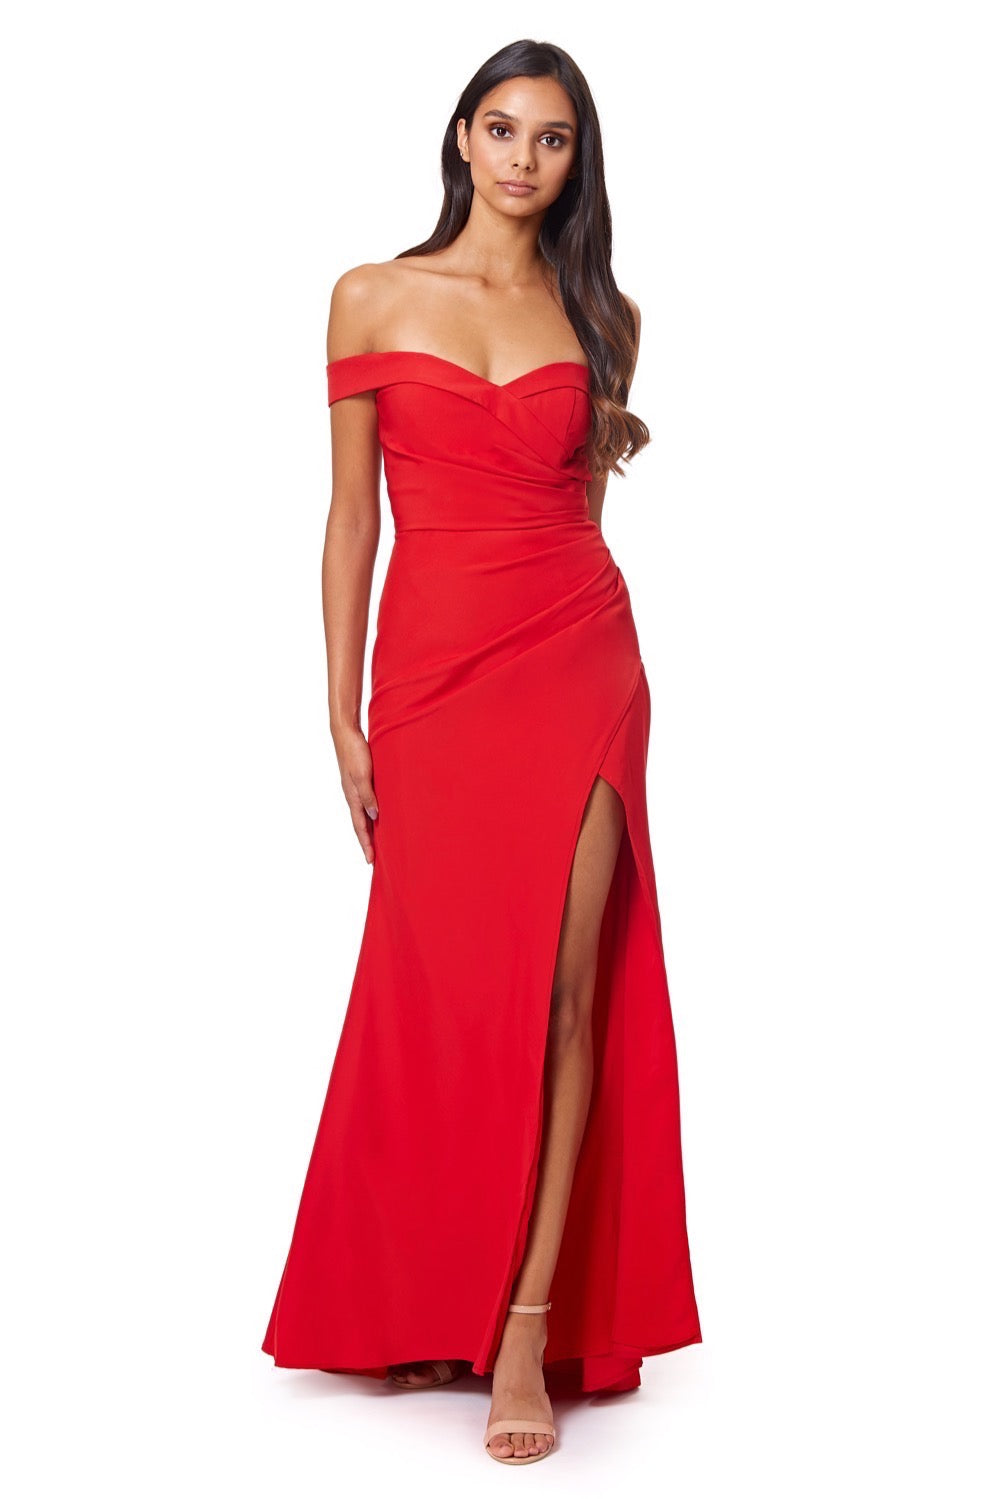 Bluebell Bardot Maxi Dress With Thigh Split And Button Back, UK 10 / US 6 / EU 38 / Red